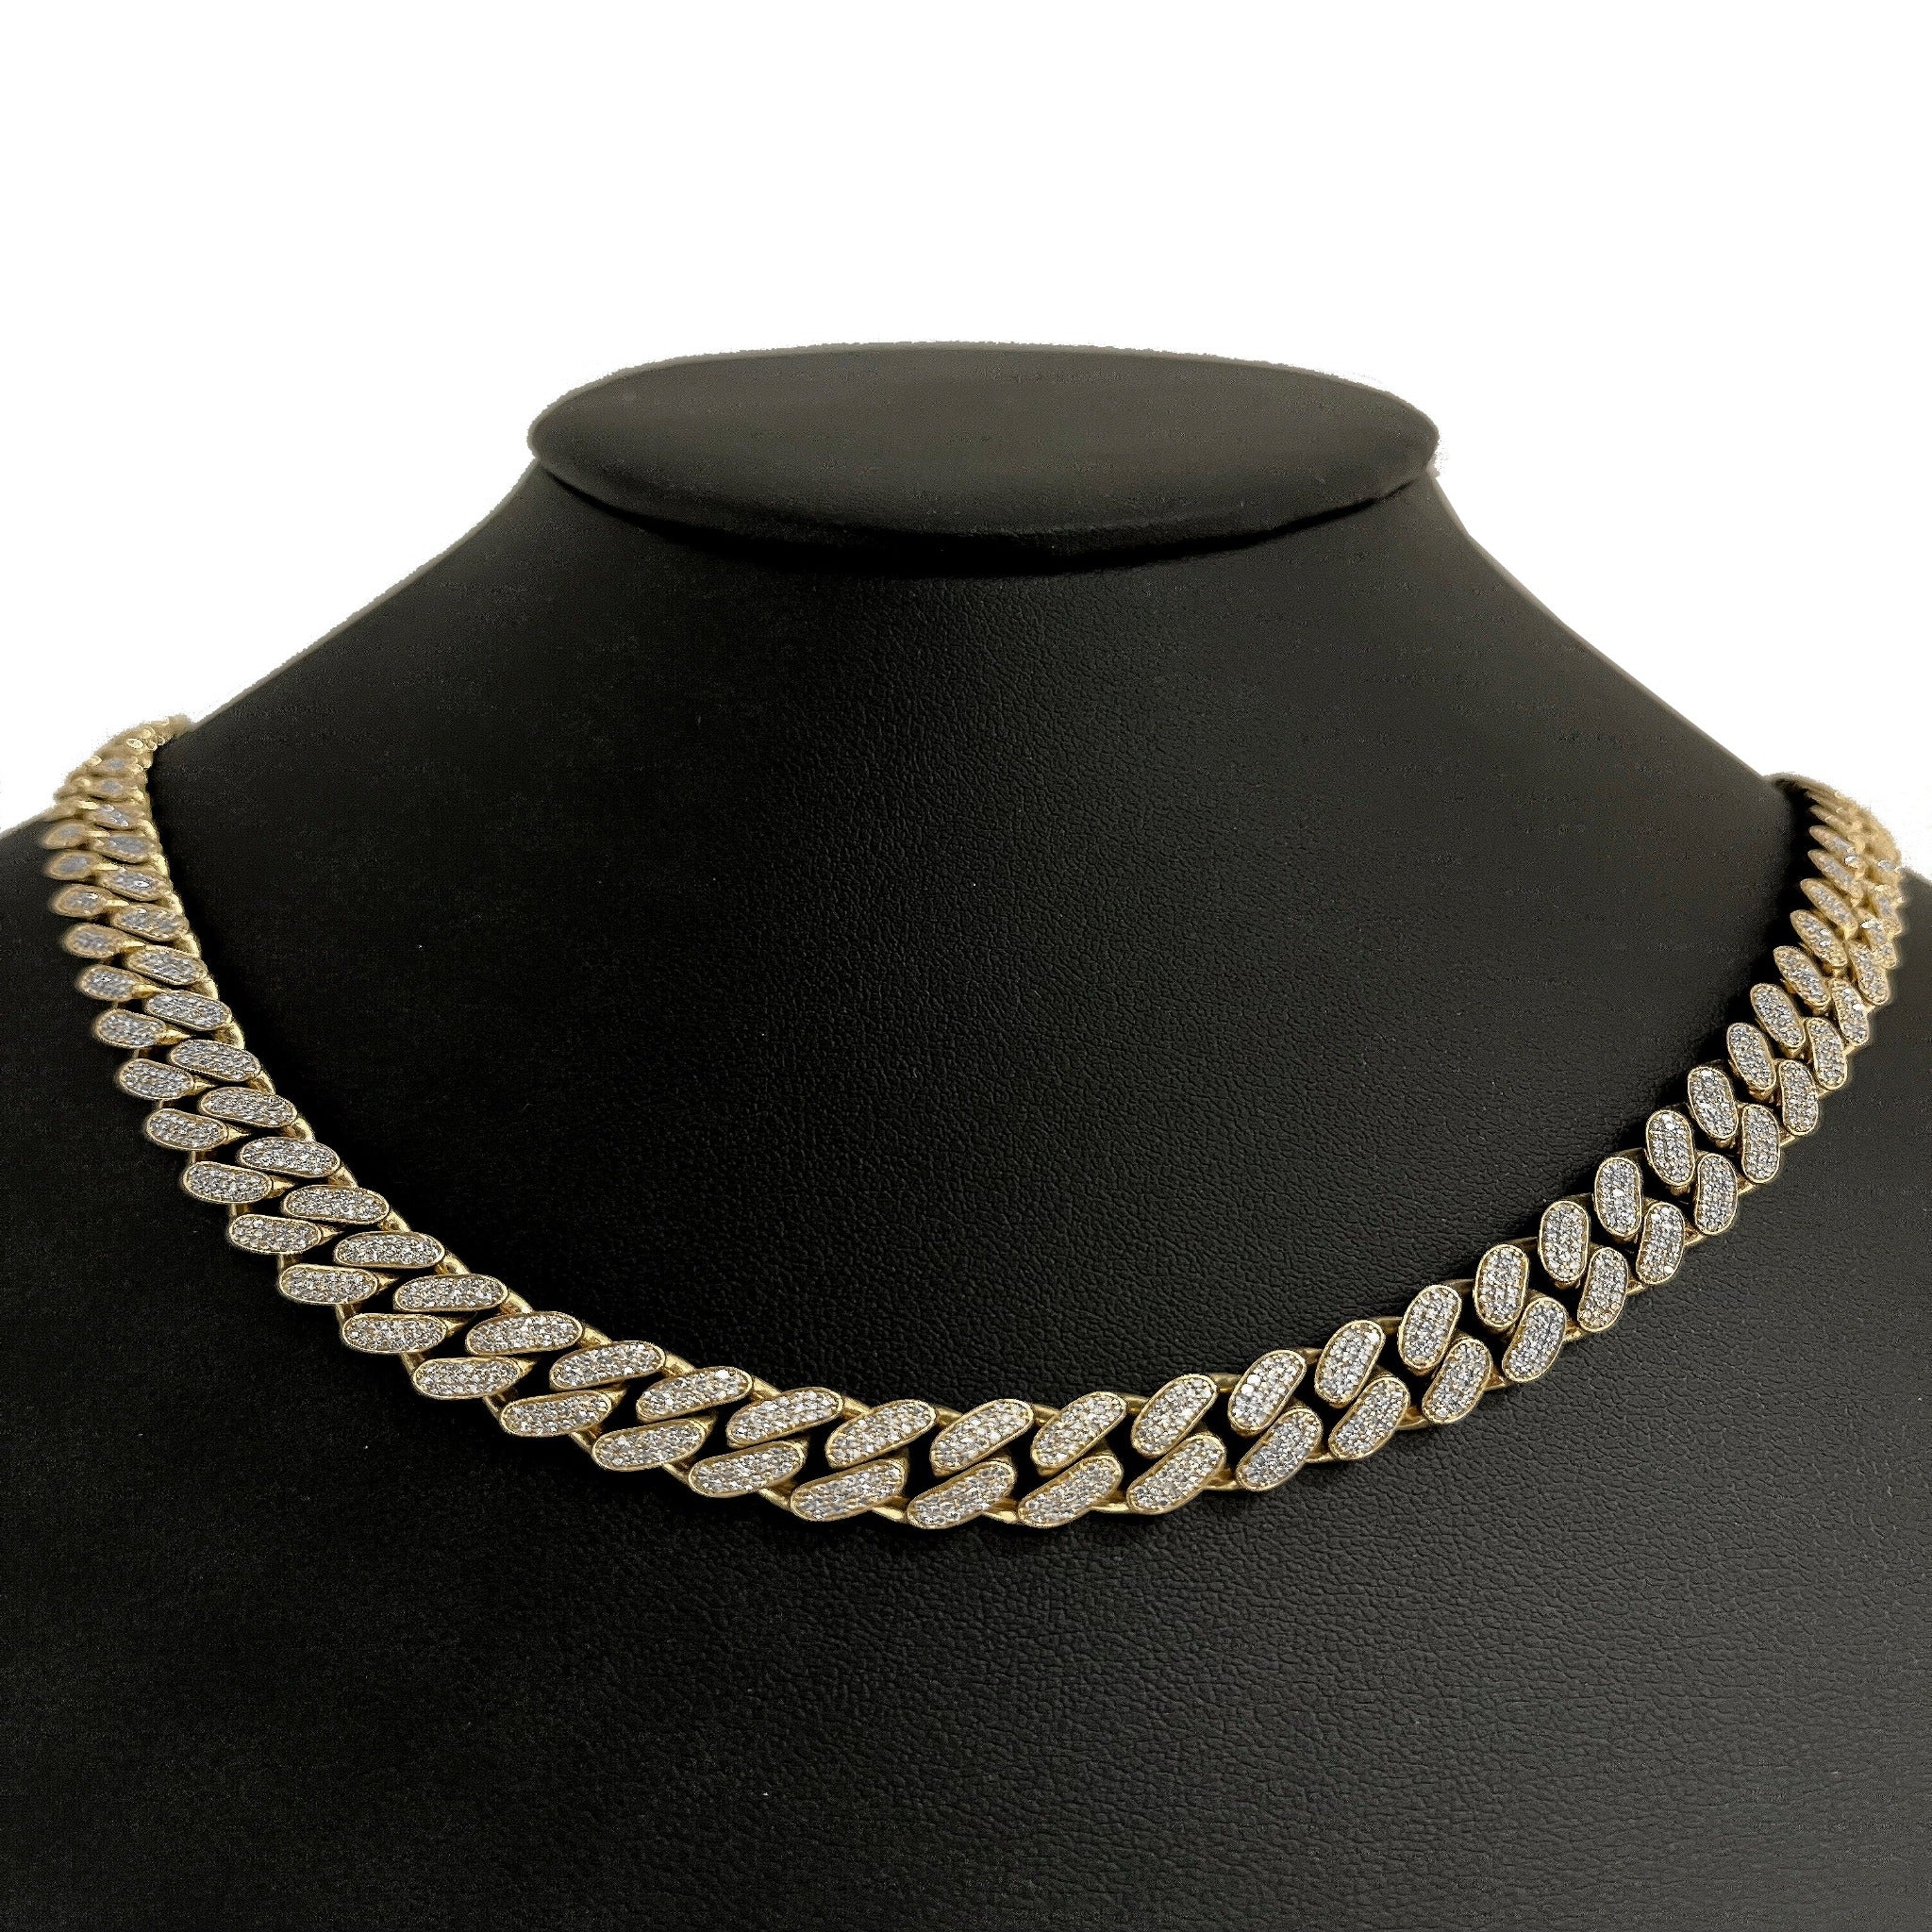 ''SPECIAL! 9MM 9.21ct 10KT Yellow Gold Diamond Micro Pave Miami Round Cuban Link NECKLACE 22'''' Long''